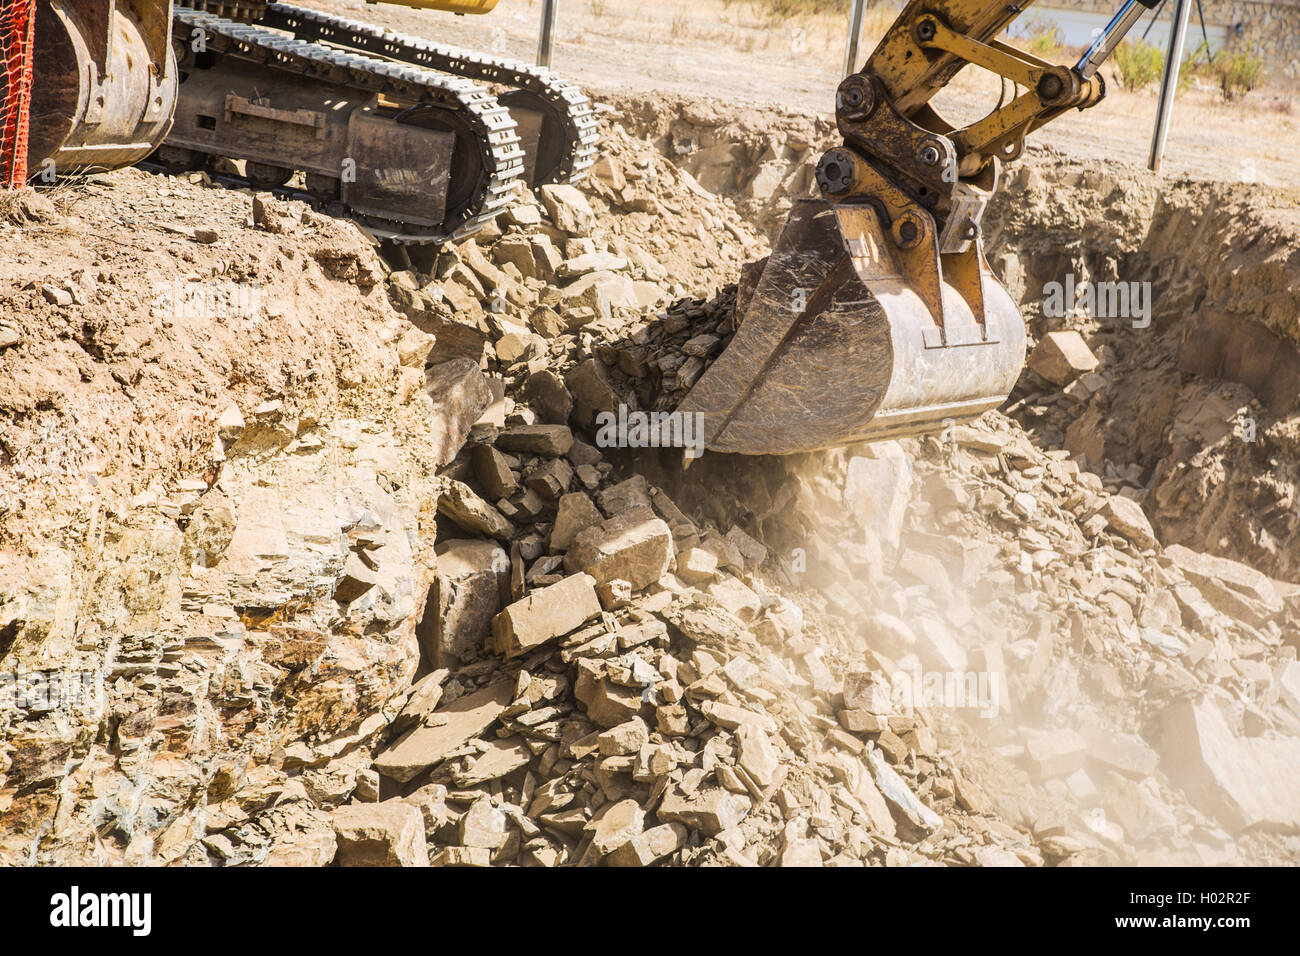 Scoop of an excavator digger removing rocks during a excavation. the tracks of the machine can be seen and dust from the dig. Stock Photo